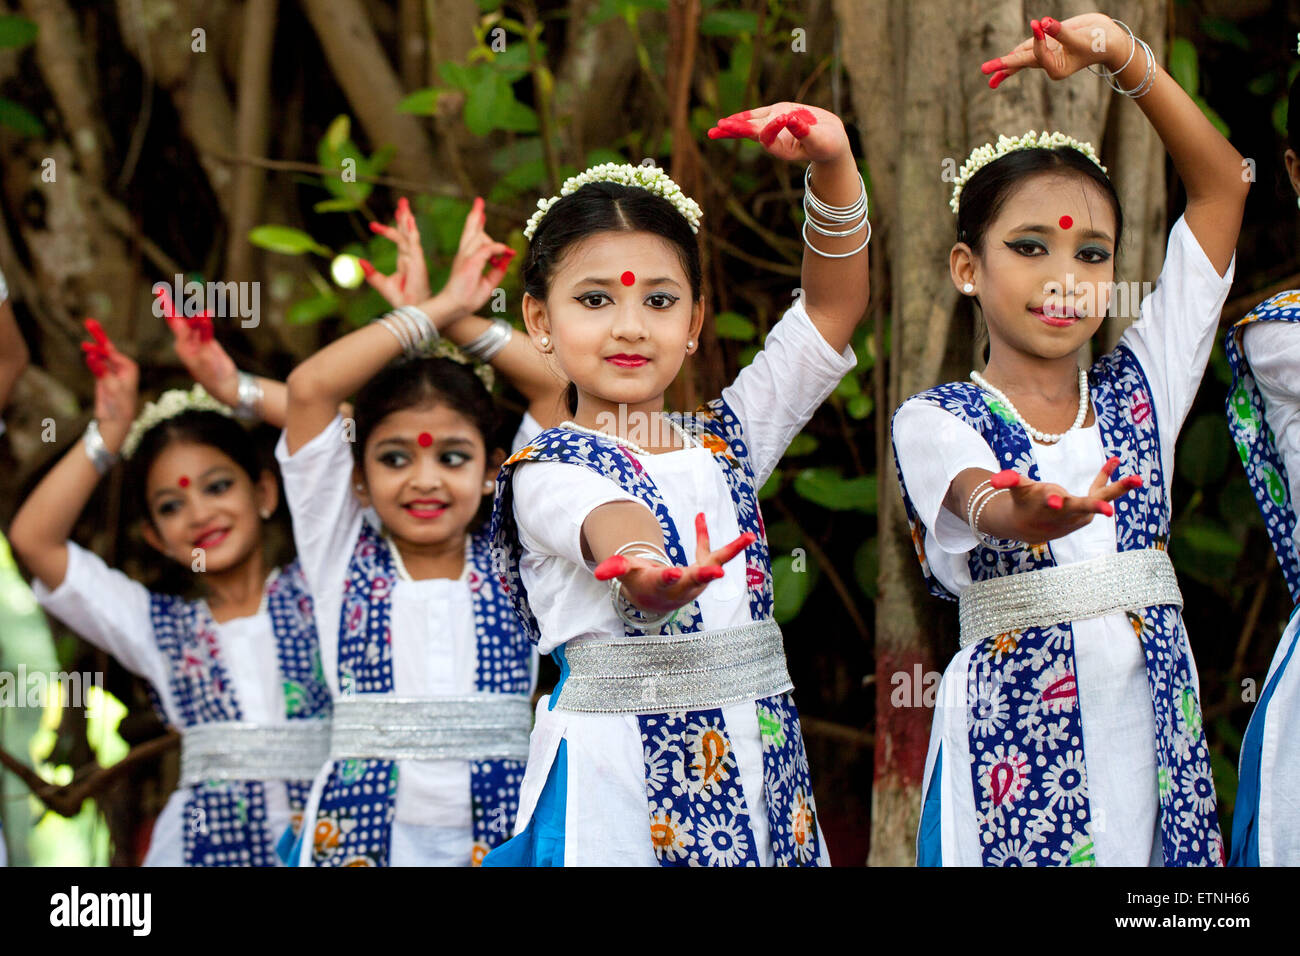 Dhaka, Bangladesh. 15th June, 2015. Bengali people celebrate Borsha utsab 1422 (Rainy season festival) at Bangla academy, arrange by Udichi Shilpi Gosthi in Dhaka. Borsha Festival is observed in the Bangla month of Ashar and Srabon that compromises the rainy season (Borsha). In this month, the nature talks in rain as if it's her only language. During this season, low lands are flooded and boat becomes the only way of transportation in those areas. Kadam flowers make a great effect in the romantic mind of the Bangle. Credit:  ZUMA Press, Inc./Alamy Live News Stock Photo